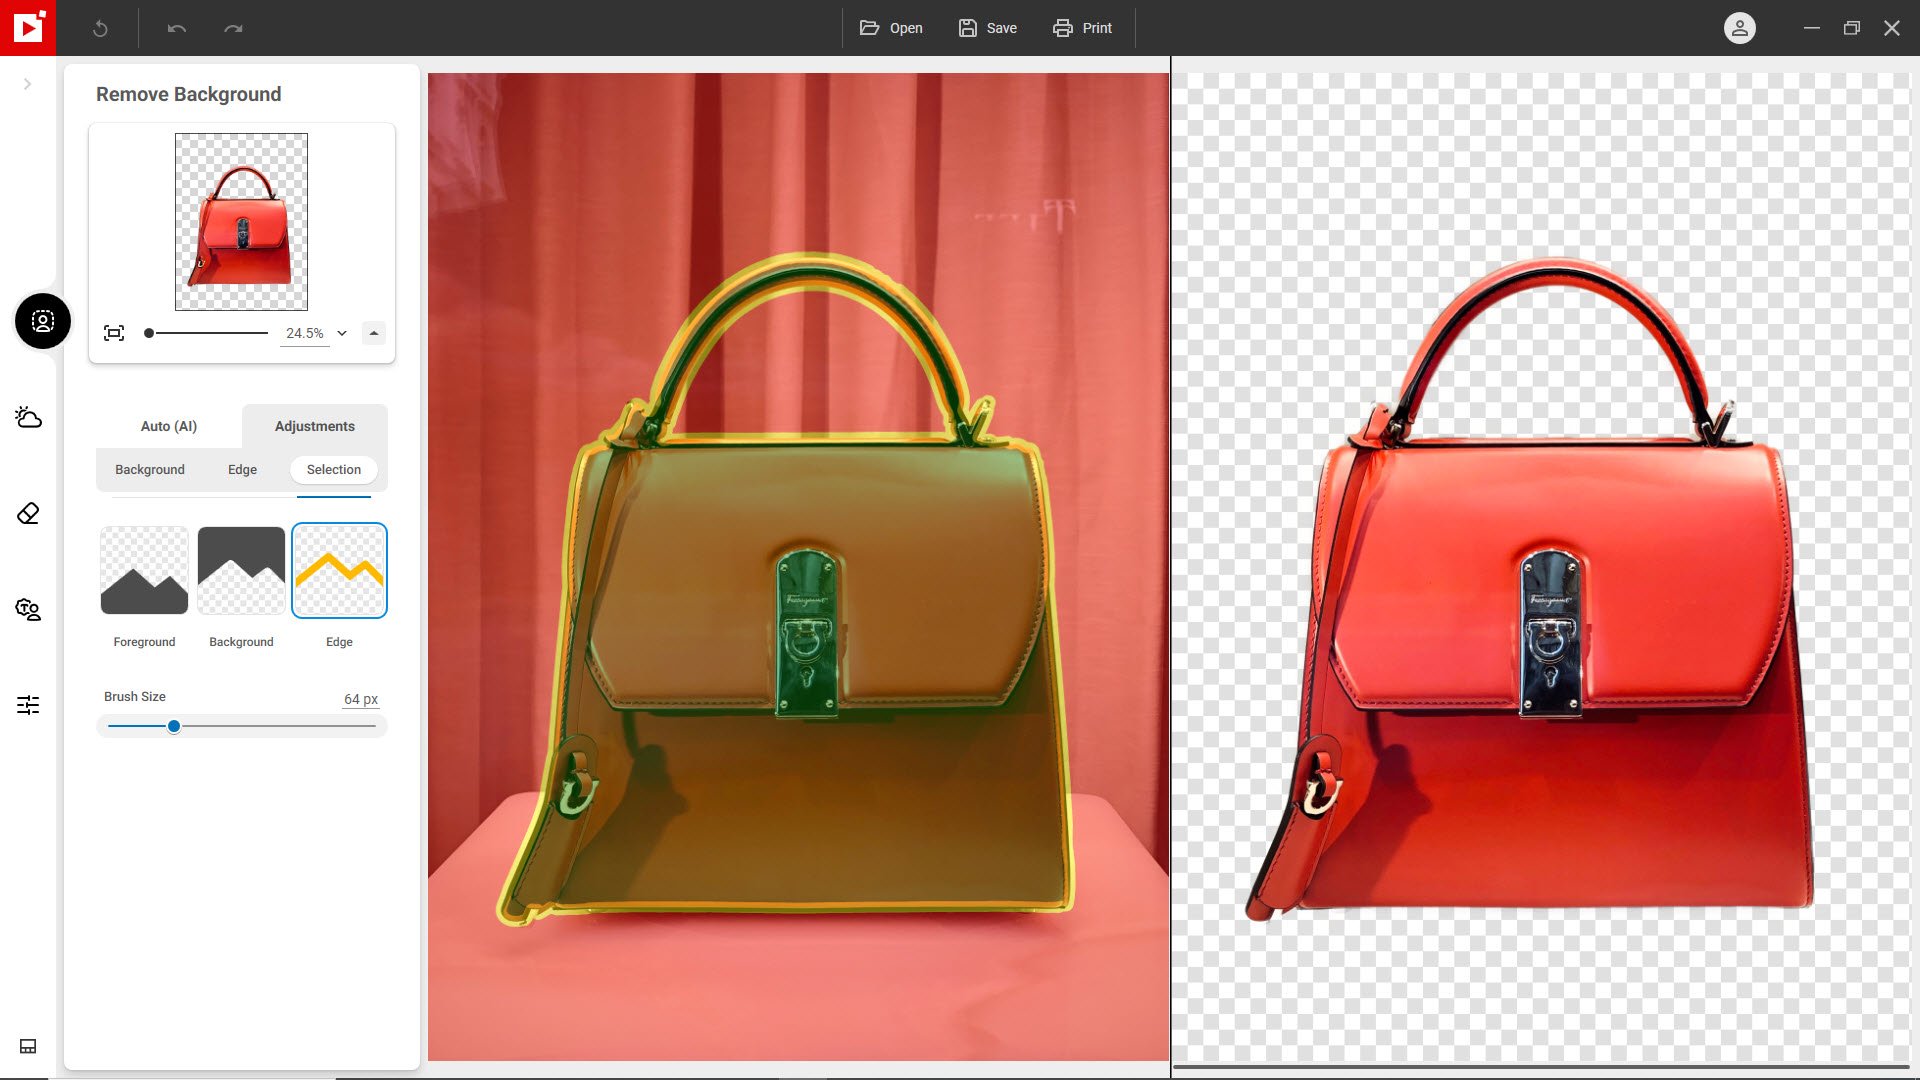 Red handbag with background selection visible